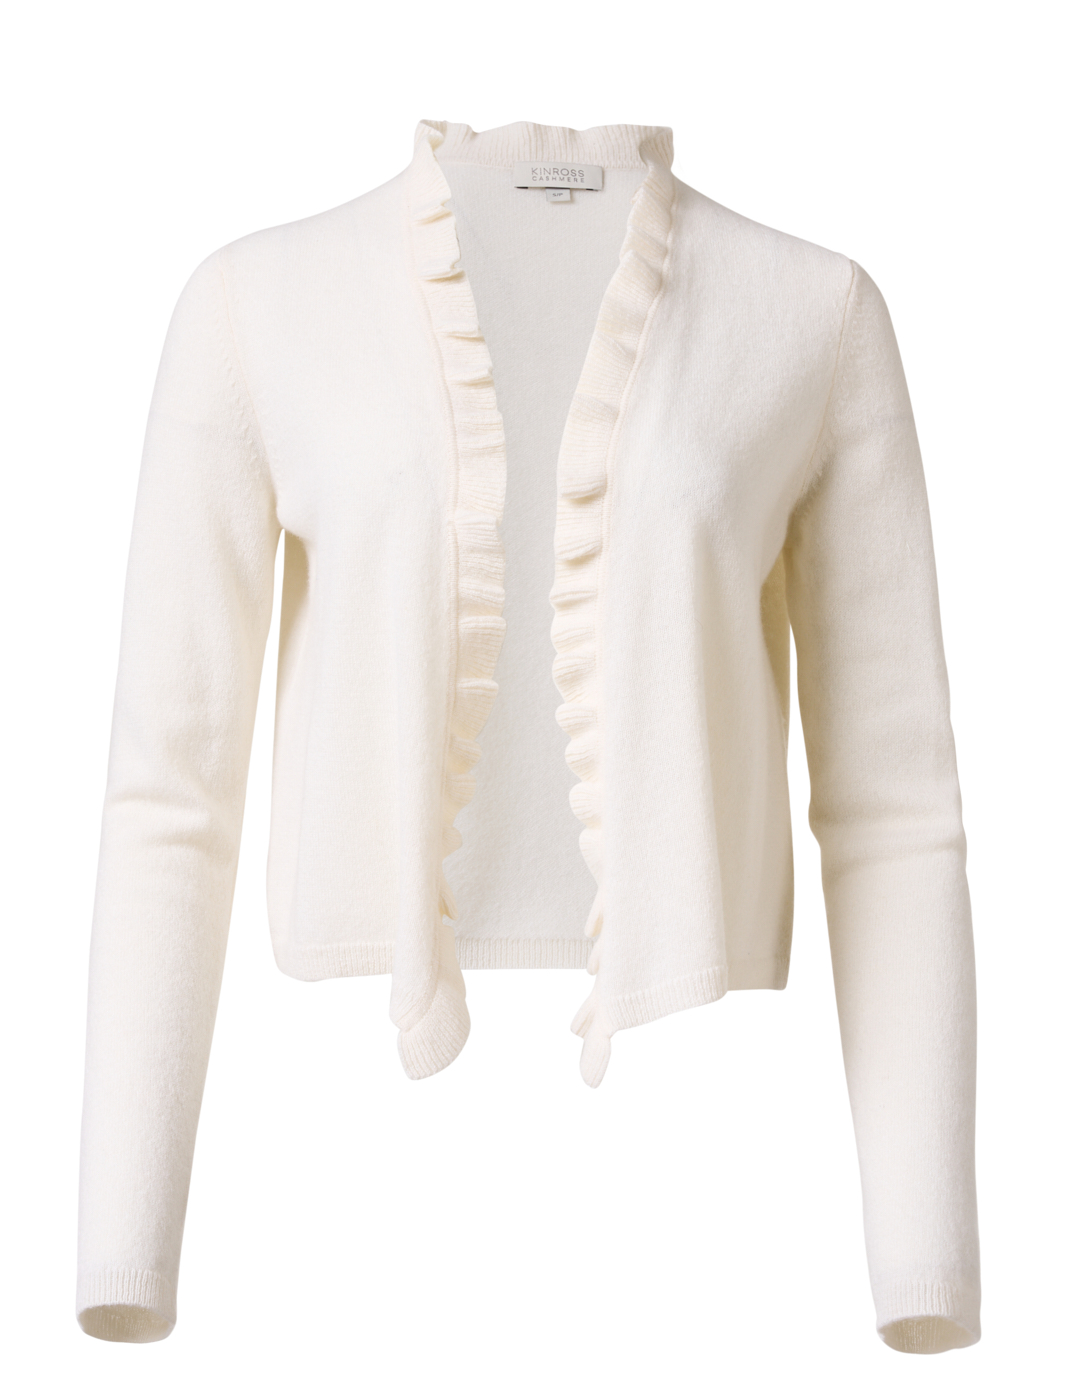 Cropped cardigan - Col. White